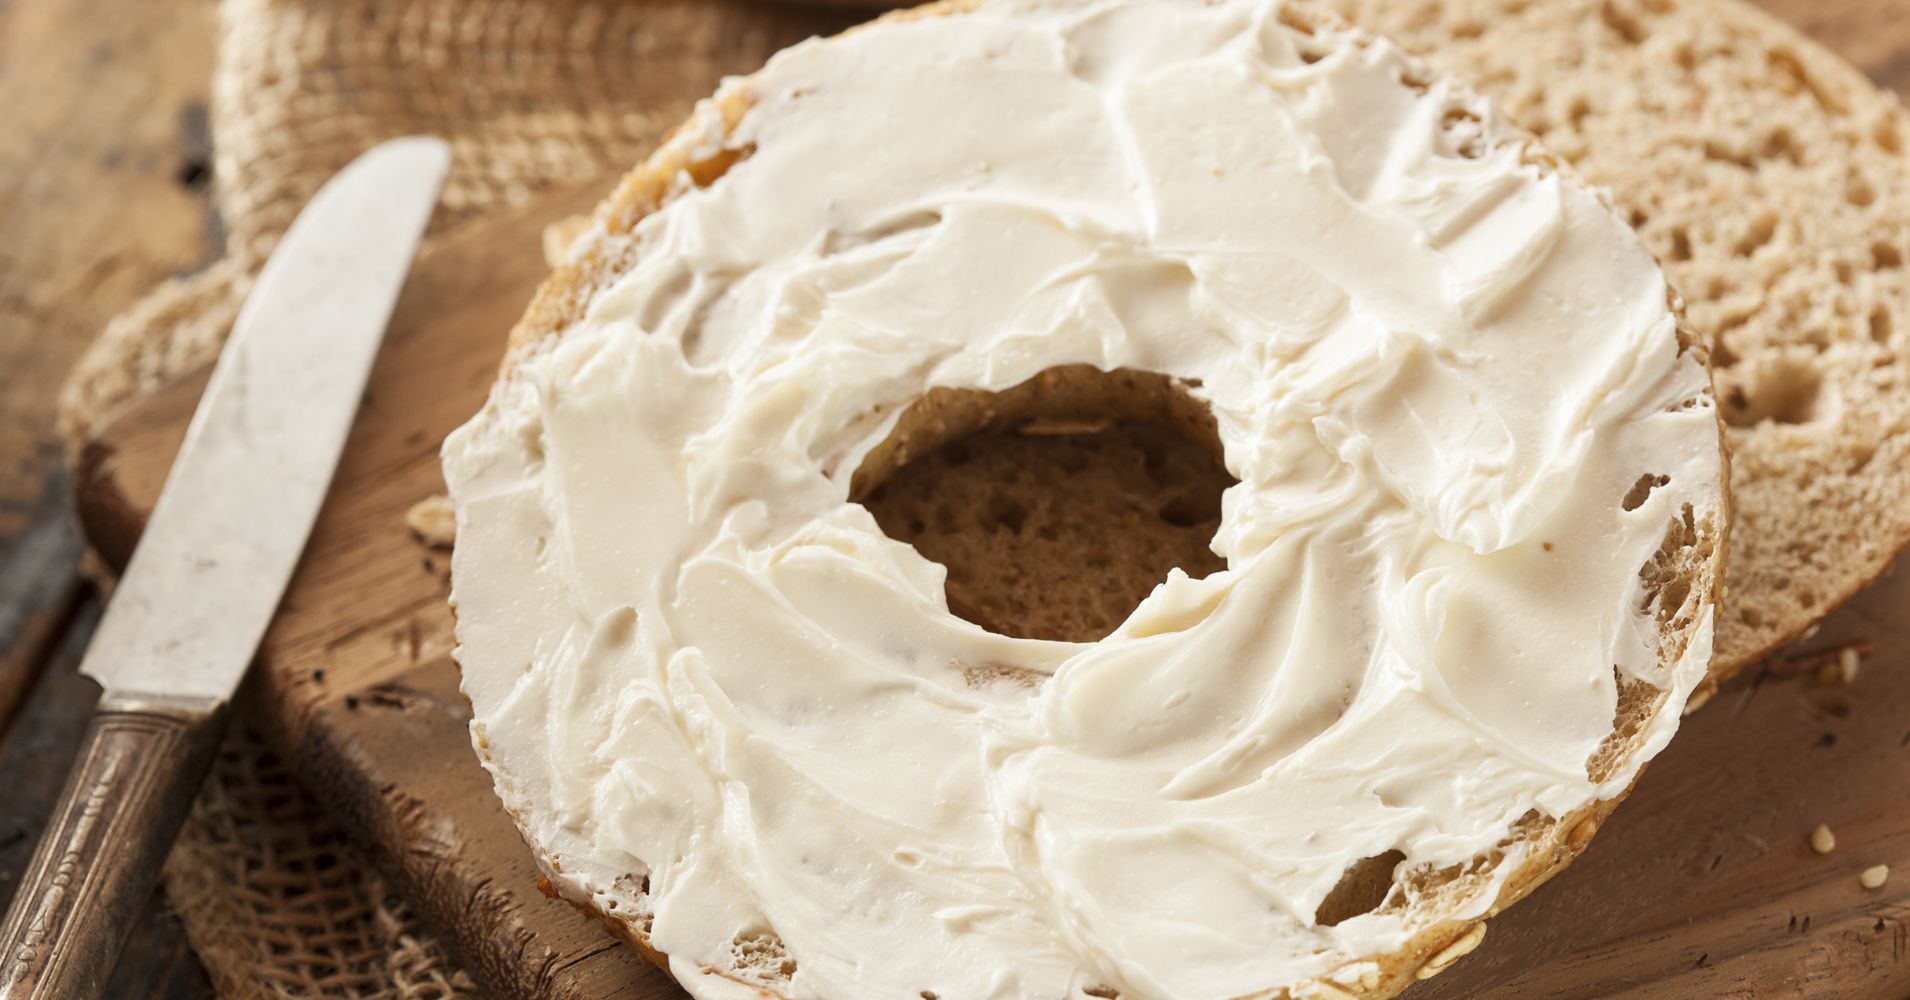 How To Make Your Own Cream Cheese | HuffPost